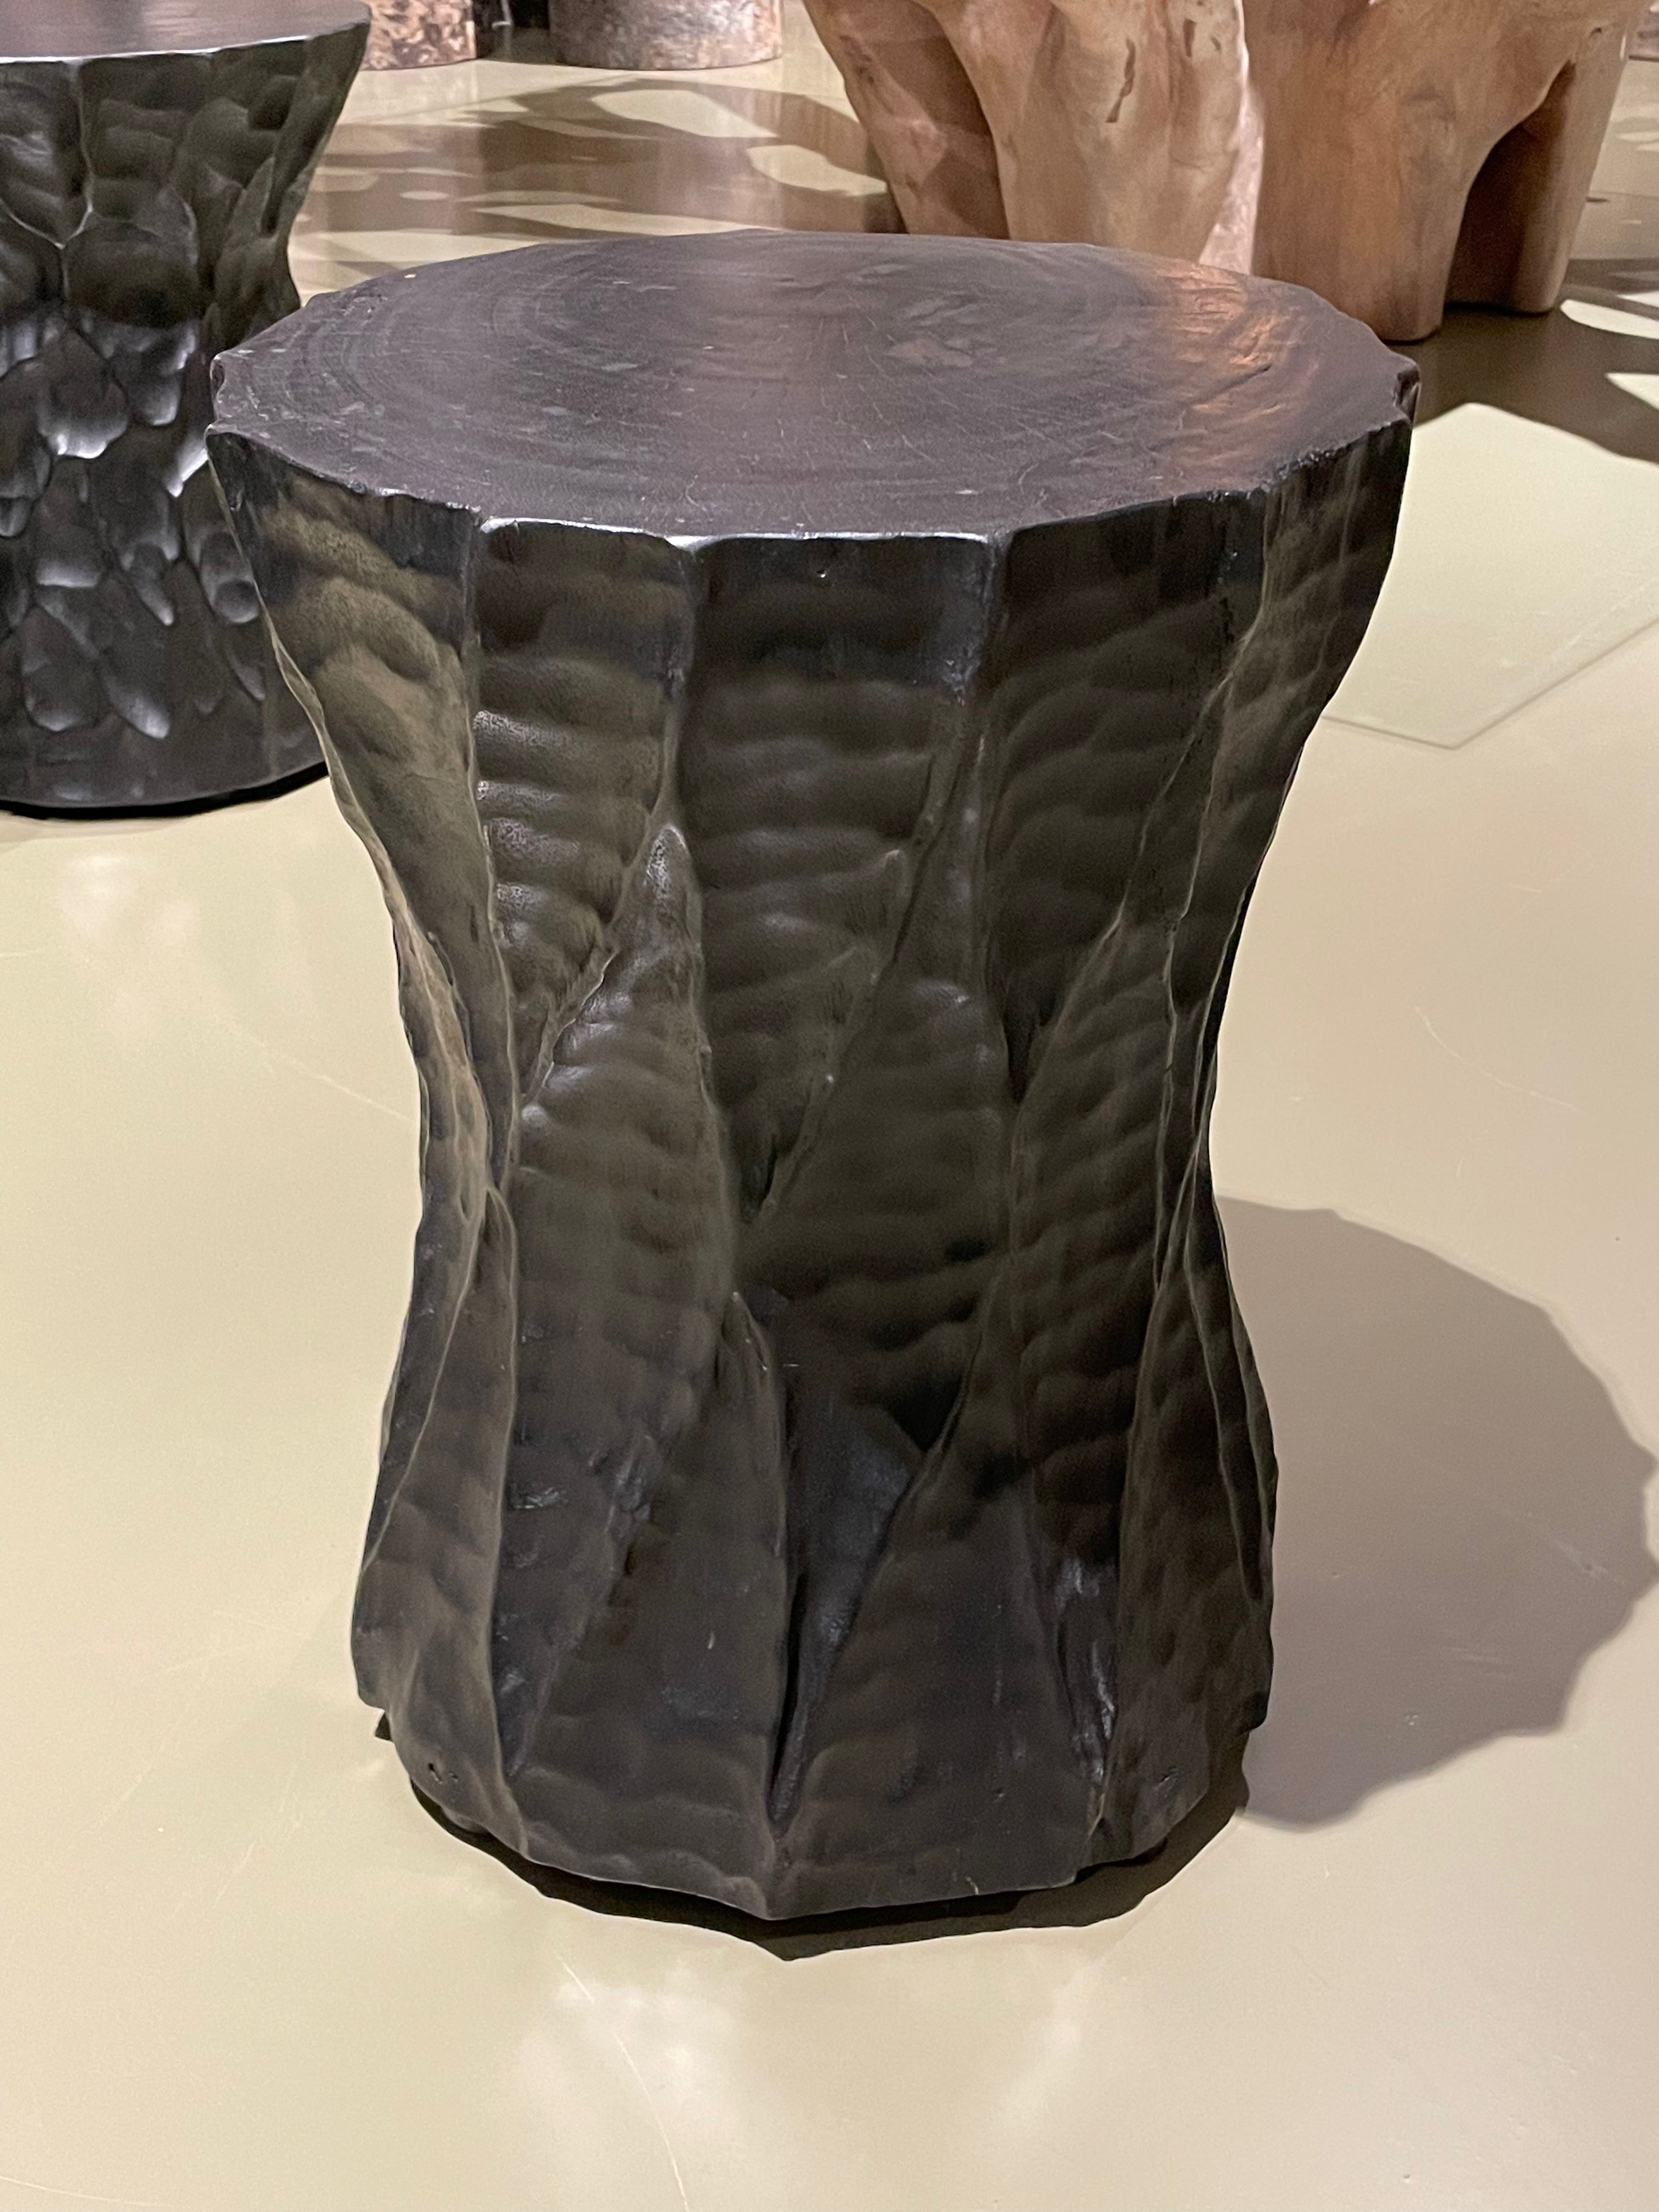 Contemporary Indonesian ebonized suar wood side table in an hour glass shape.
Decorative carved details on all sides.
